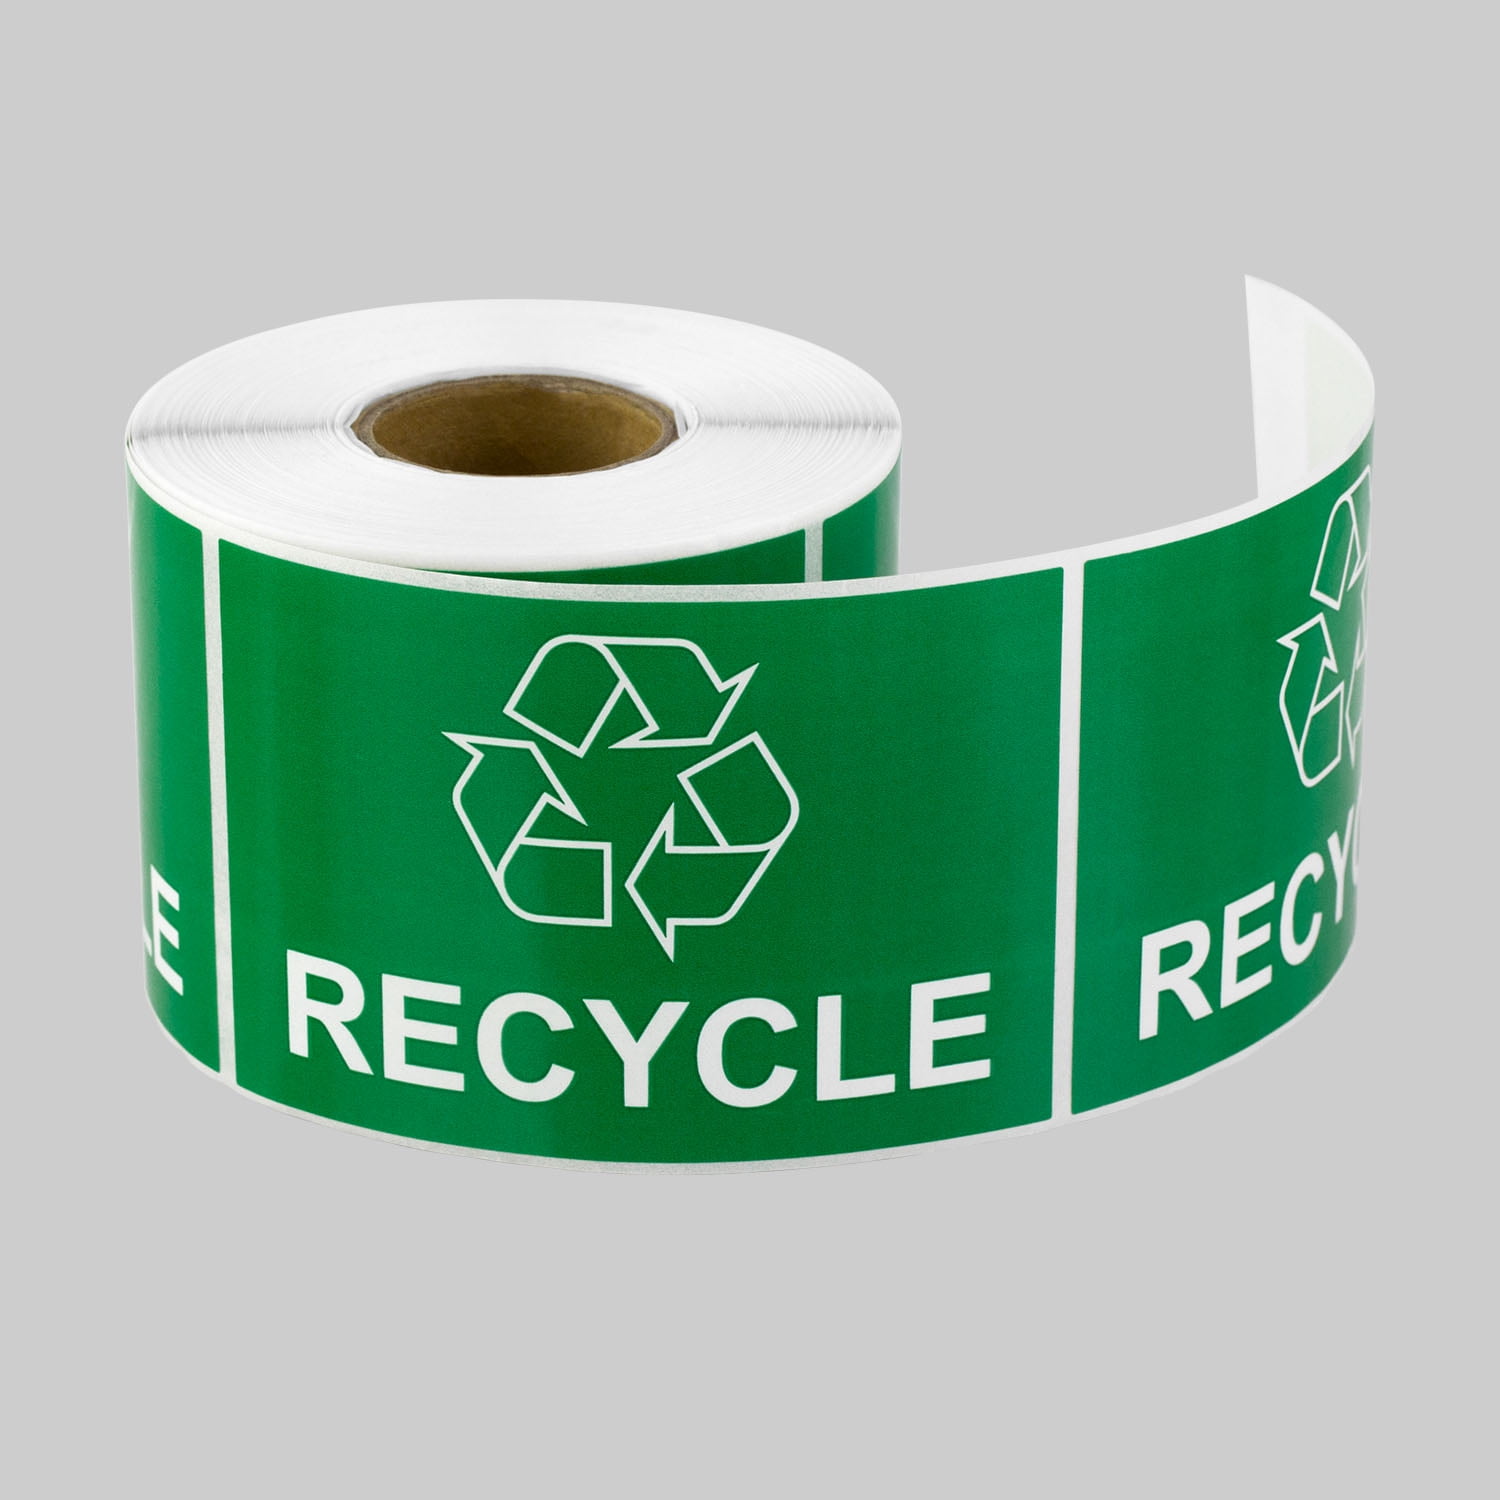 2x RECYCLE RECYCLING LOGO SELF ADHESIVE VINYL STICKERS FREE POSTAGE 